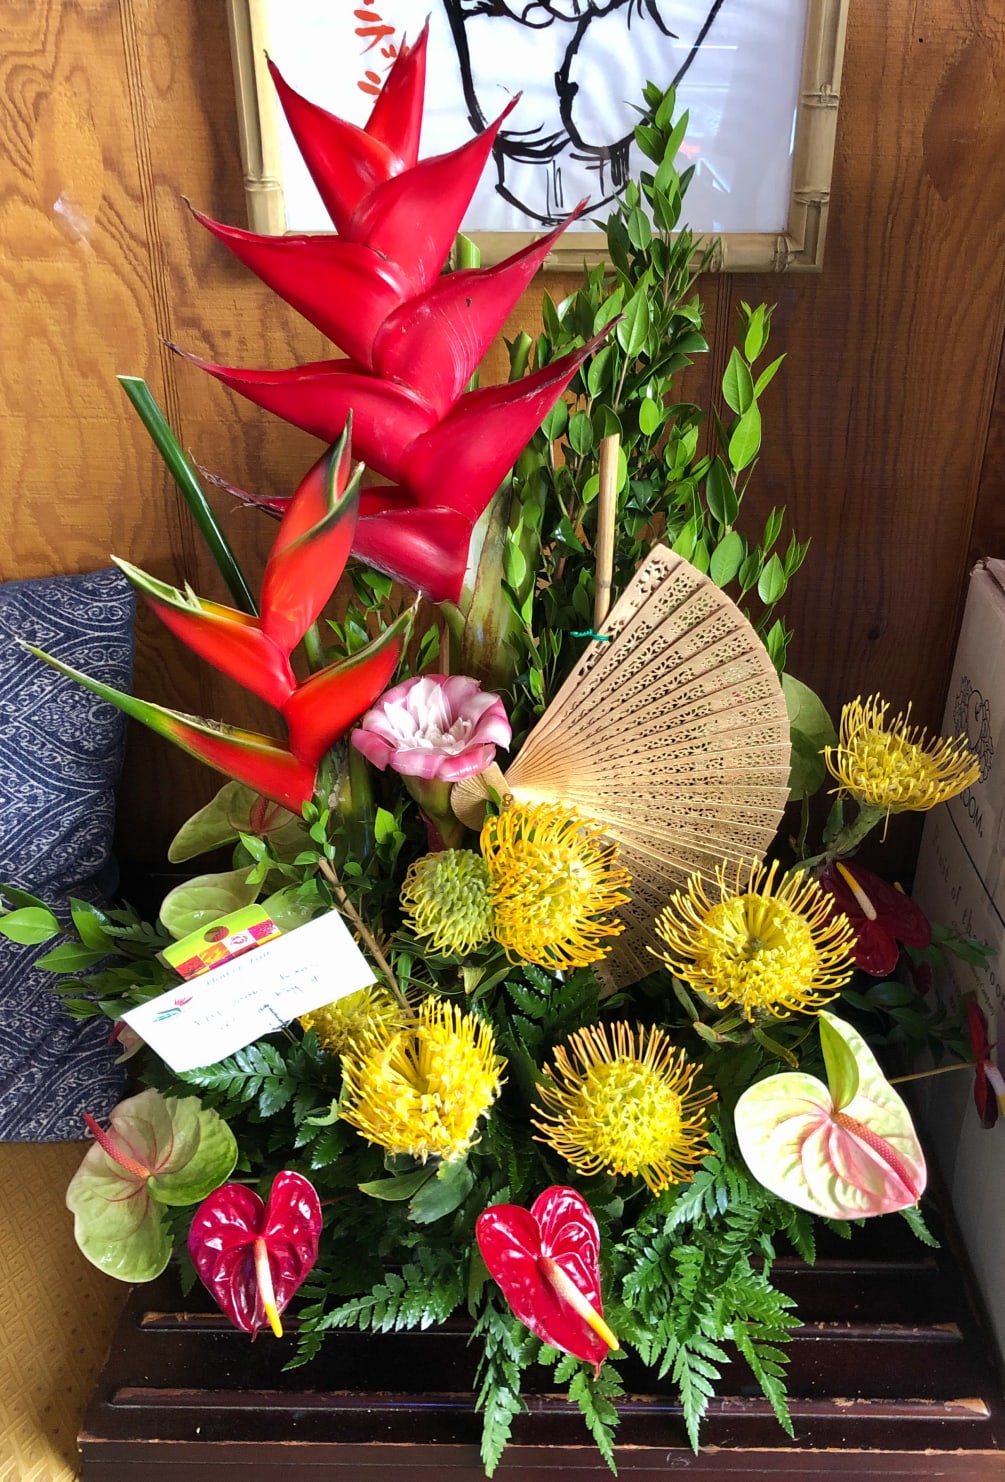 Heleconias and Pincushion Proteas accented with assorted tropical flowers and greenery. 